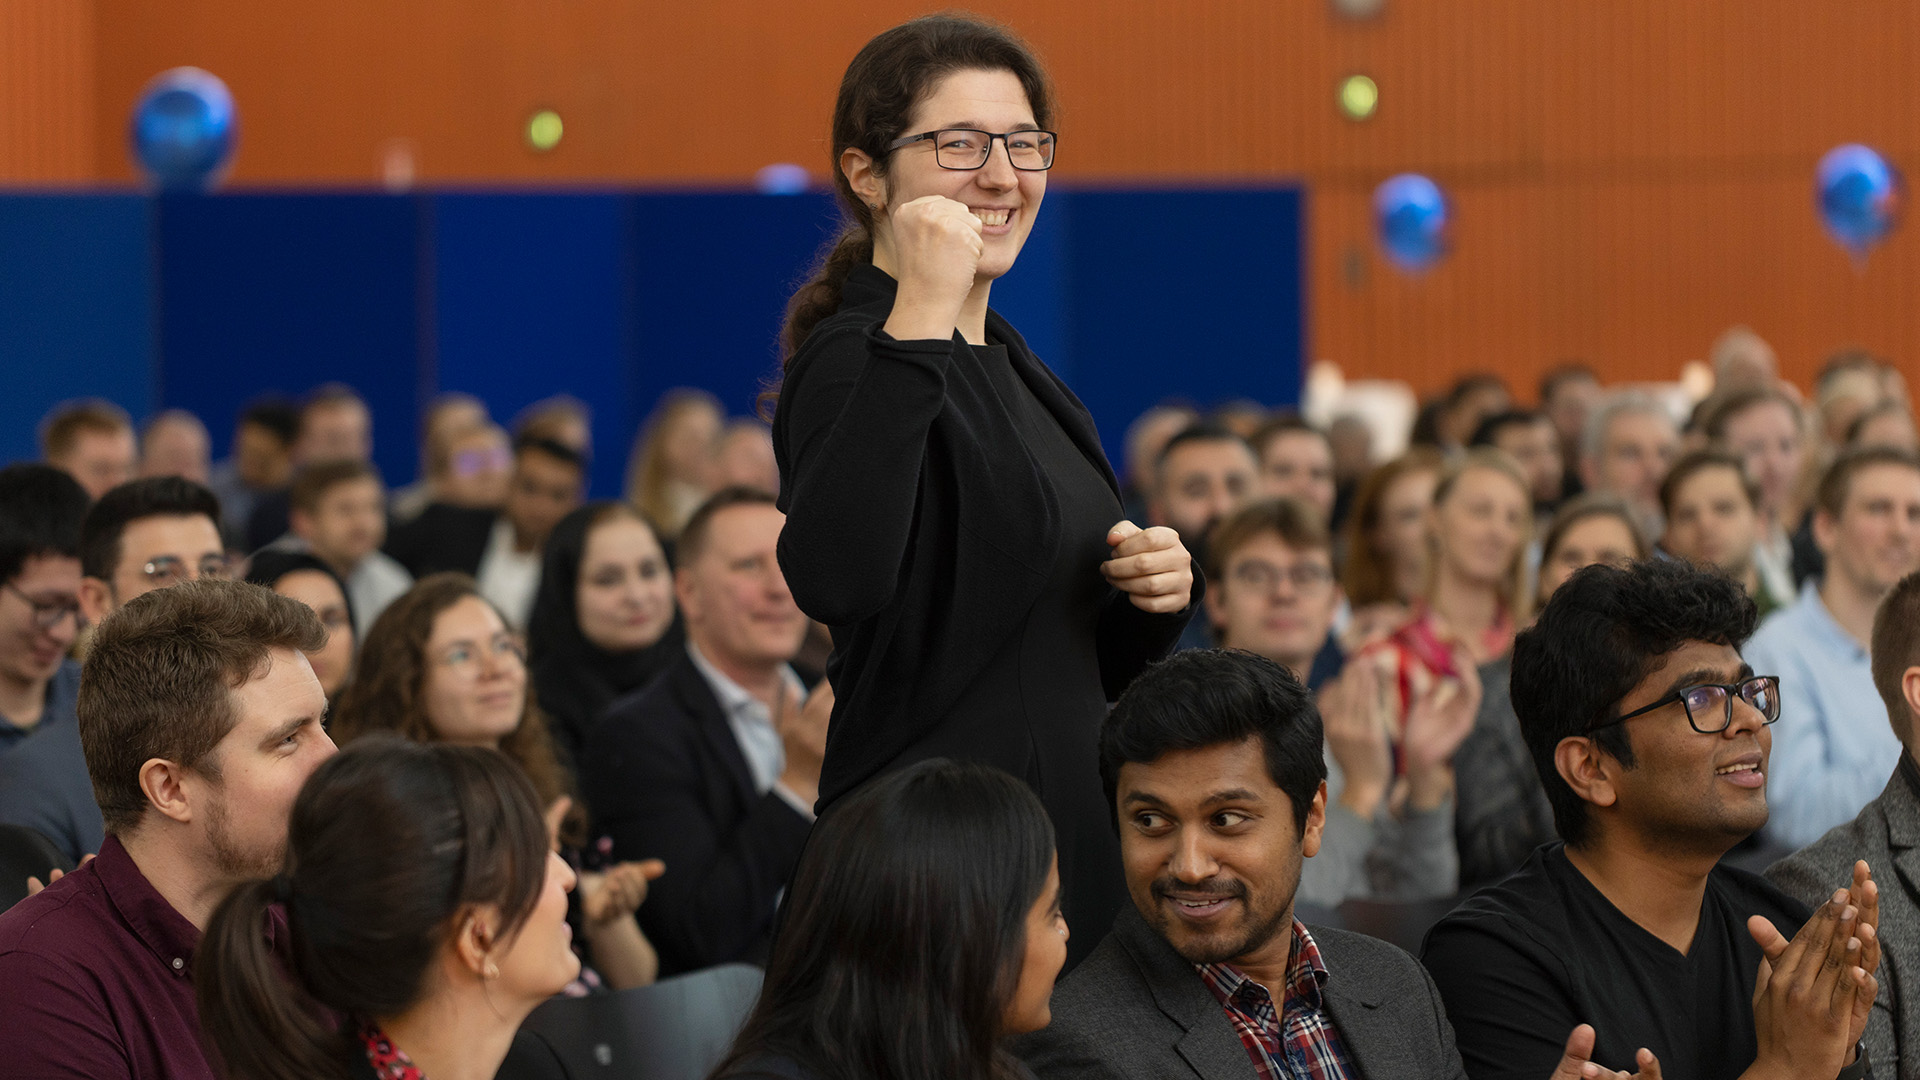 355 candidates have defended their Ph.D. thesis at DTU in the past year, and out of them 143 showed up to receive their diploma at the annual reception. At the same time, seven Ph.D. candidates were honored with prizes.